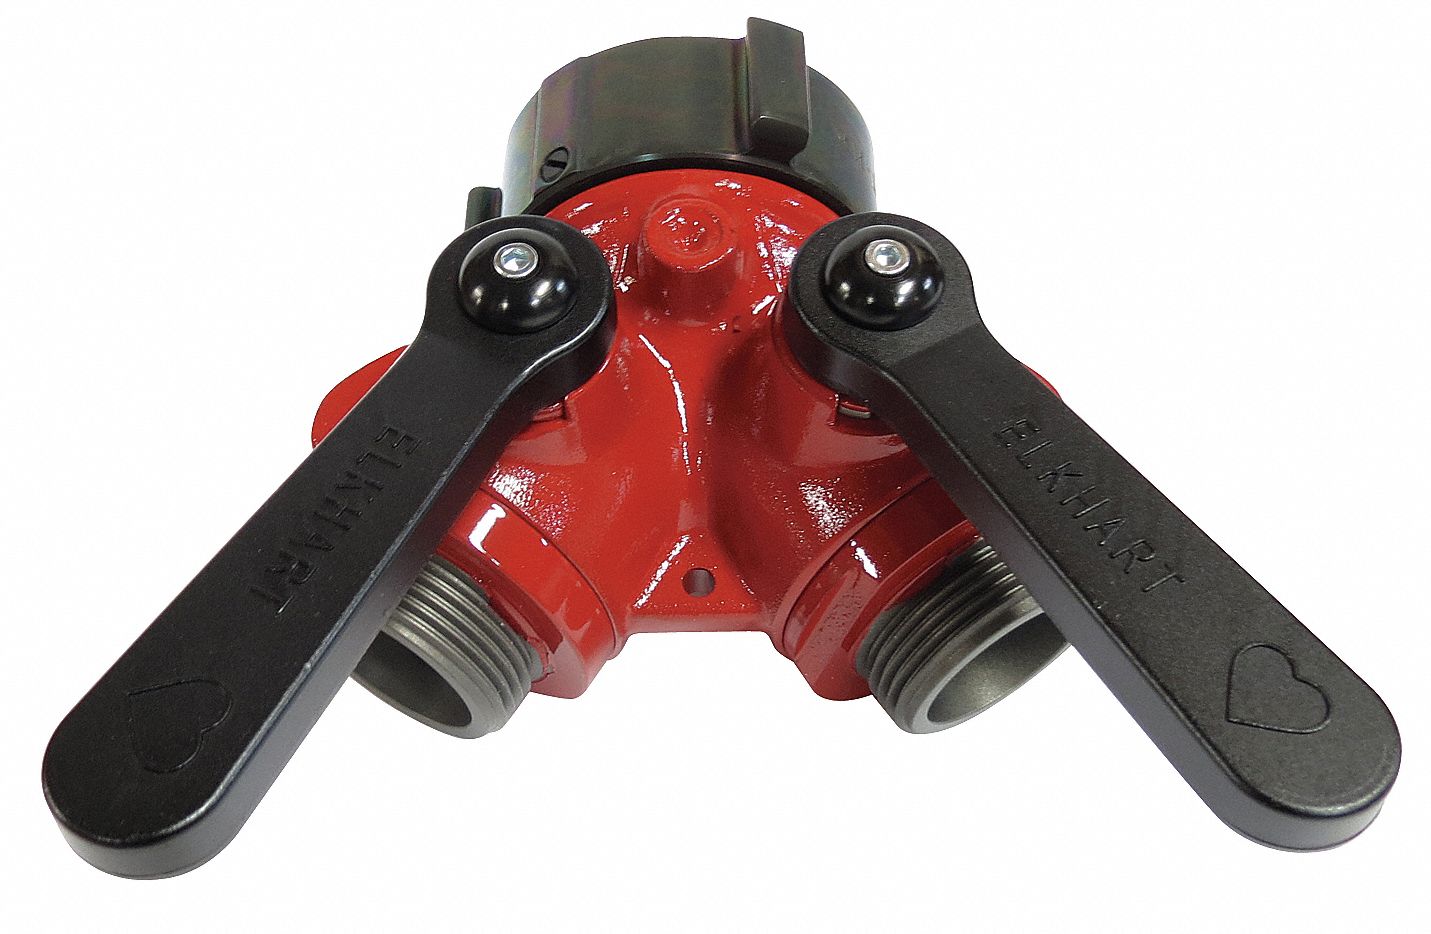 Wye Fire Hose Ball Valve,  Inlet Size 1 1/2 in FNST,  Outlet Size 1-1/2 in x 1-1/2 in MNST x MNST